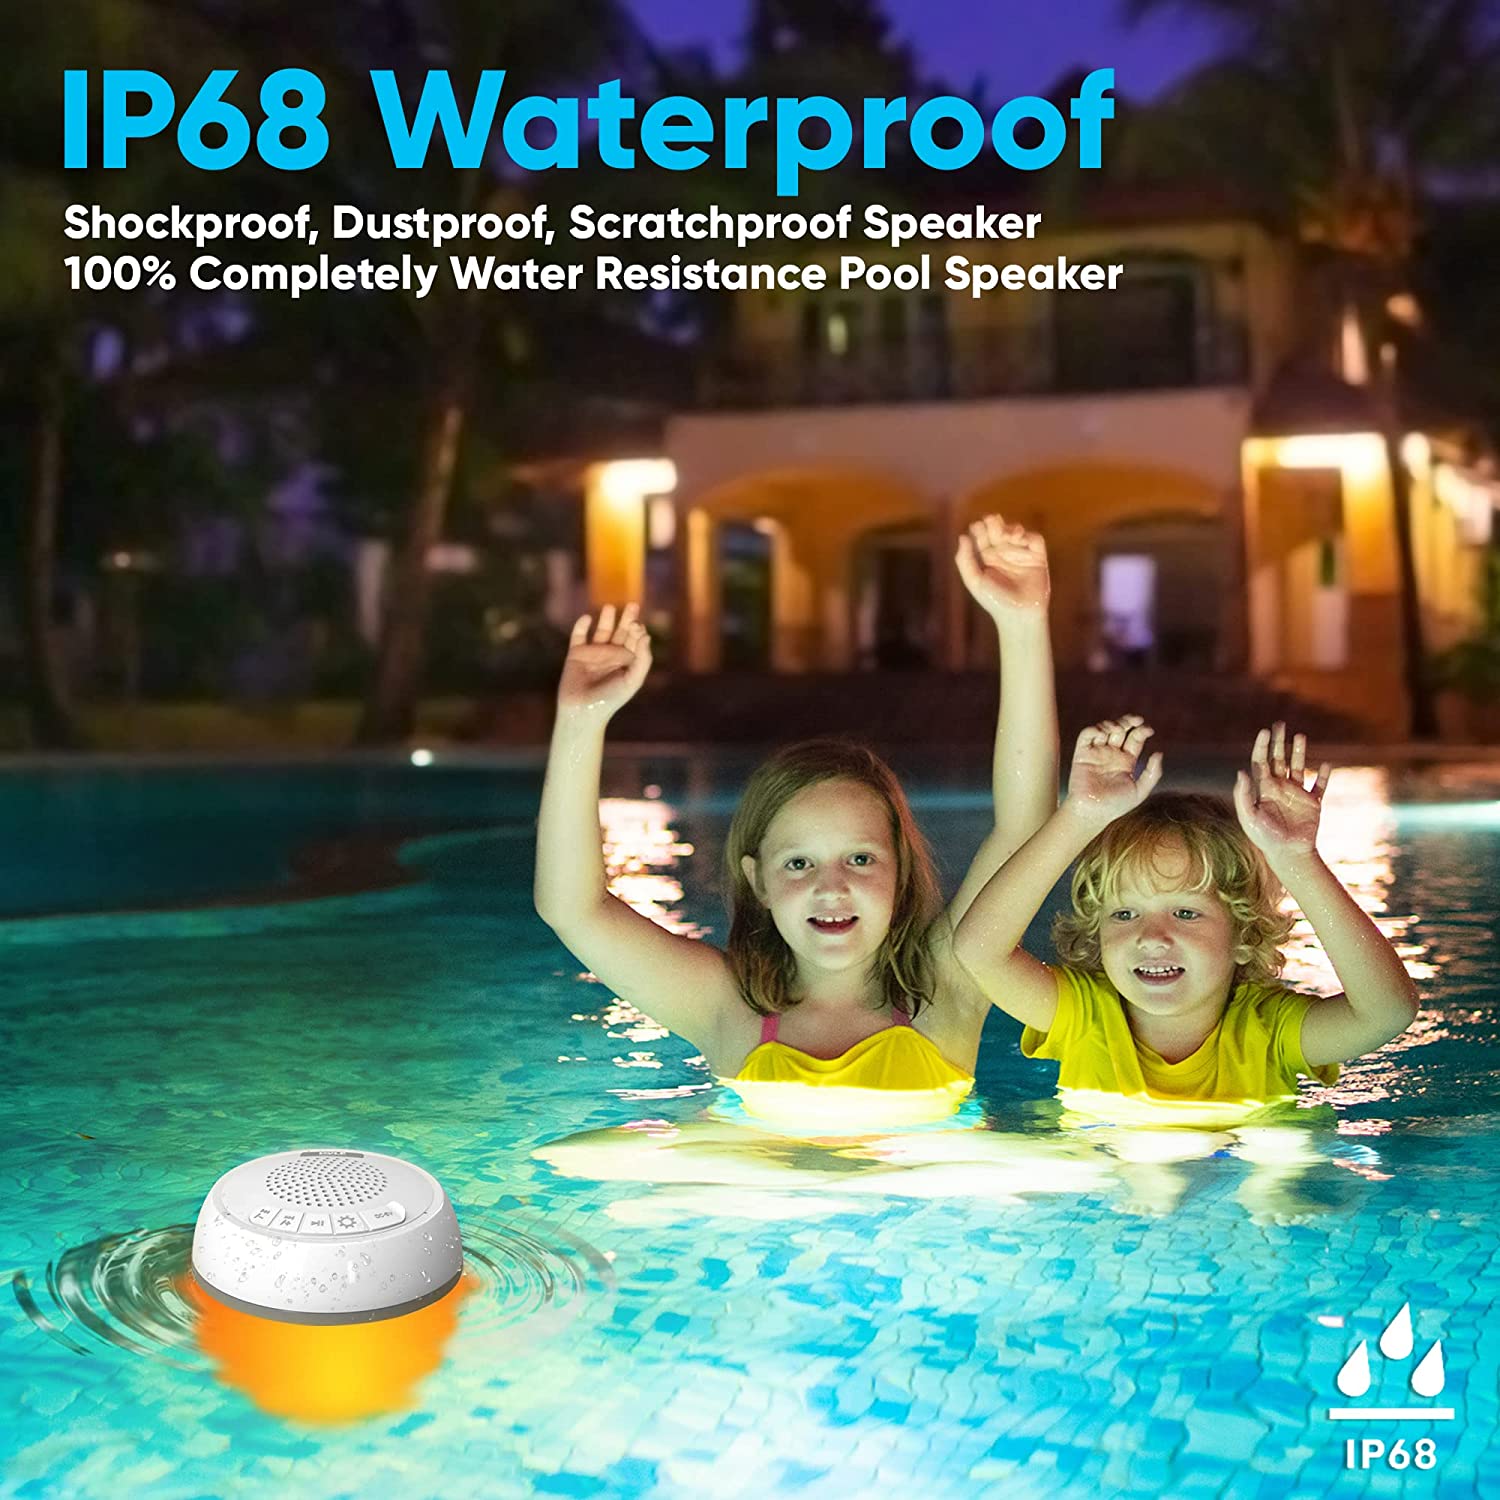 Agua Floating Waterproof Speaker with RGB LED Light lights of the galaxy